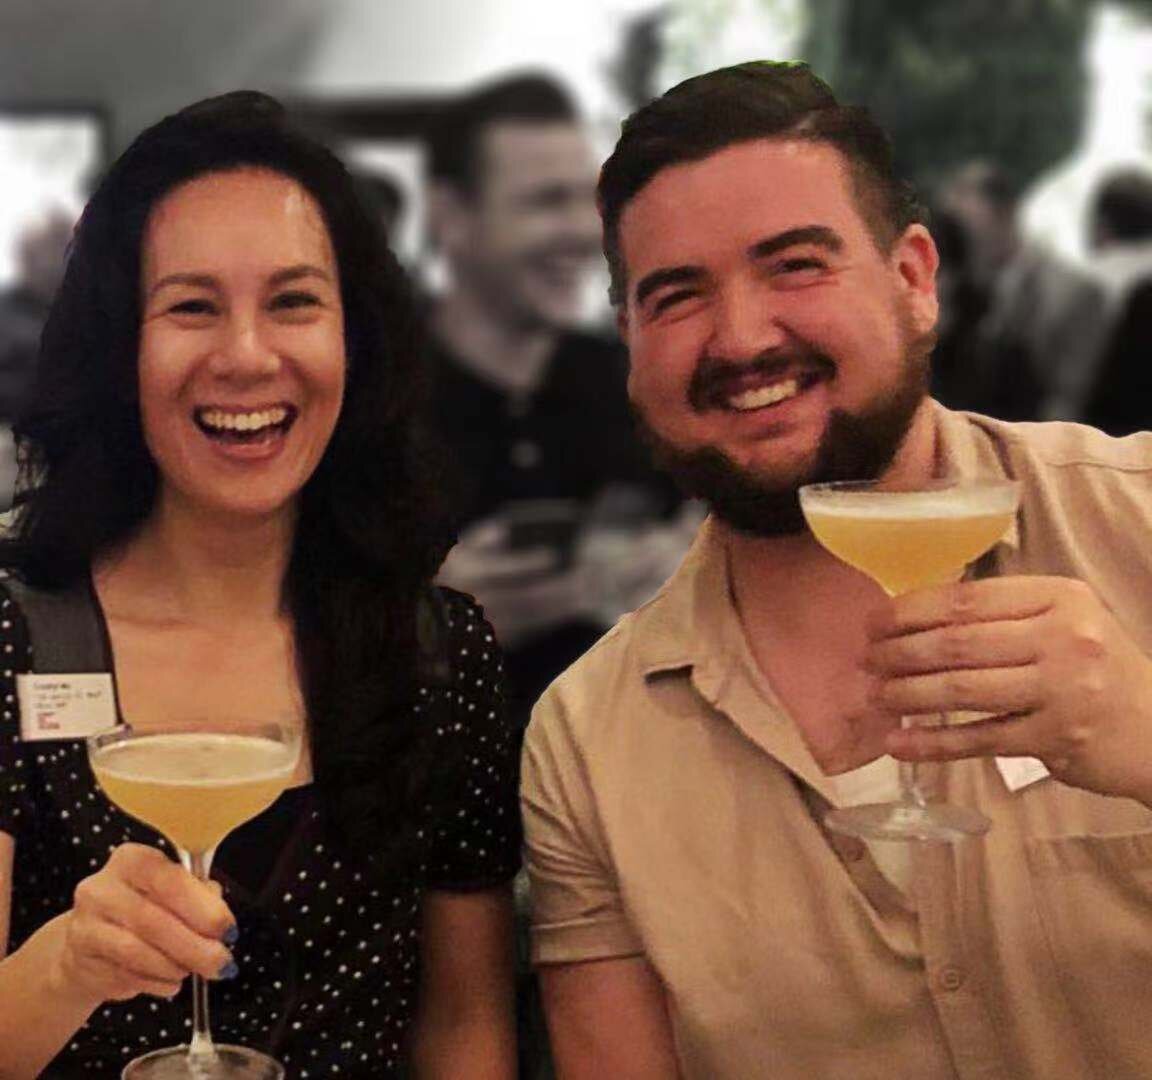 Crystyl Mo: She was referred to the podcast by Instagram influencer Michael Zee from Season 01, seen here judging a gin cocktail competition alongside Crystyl in Shanghai.